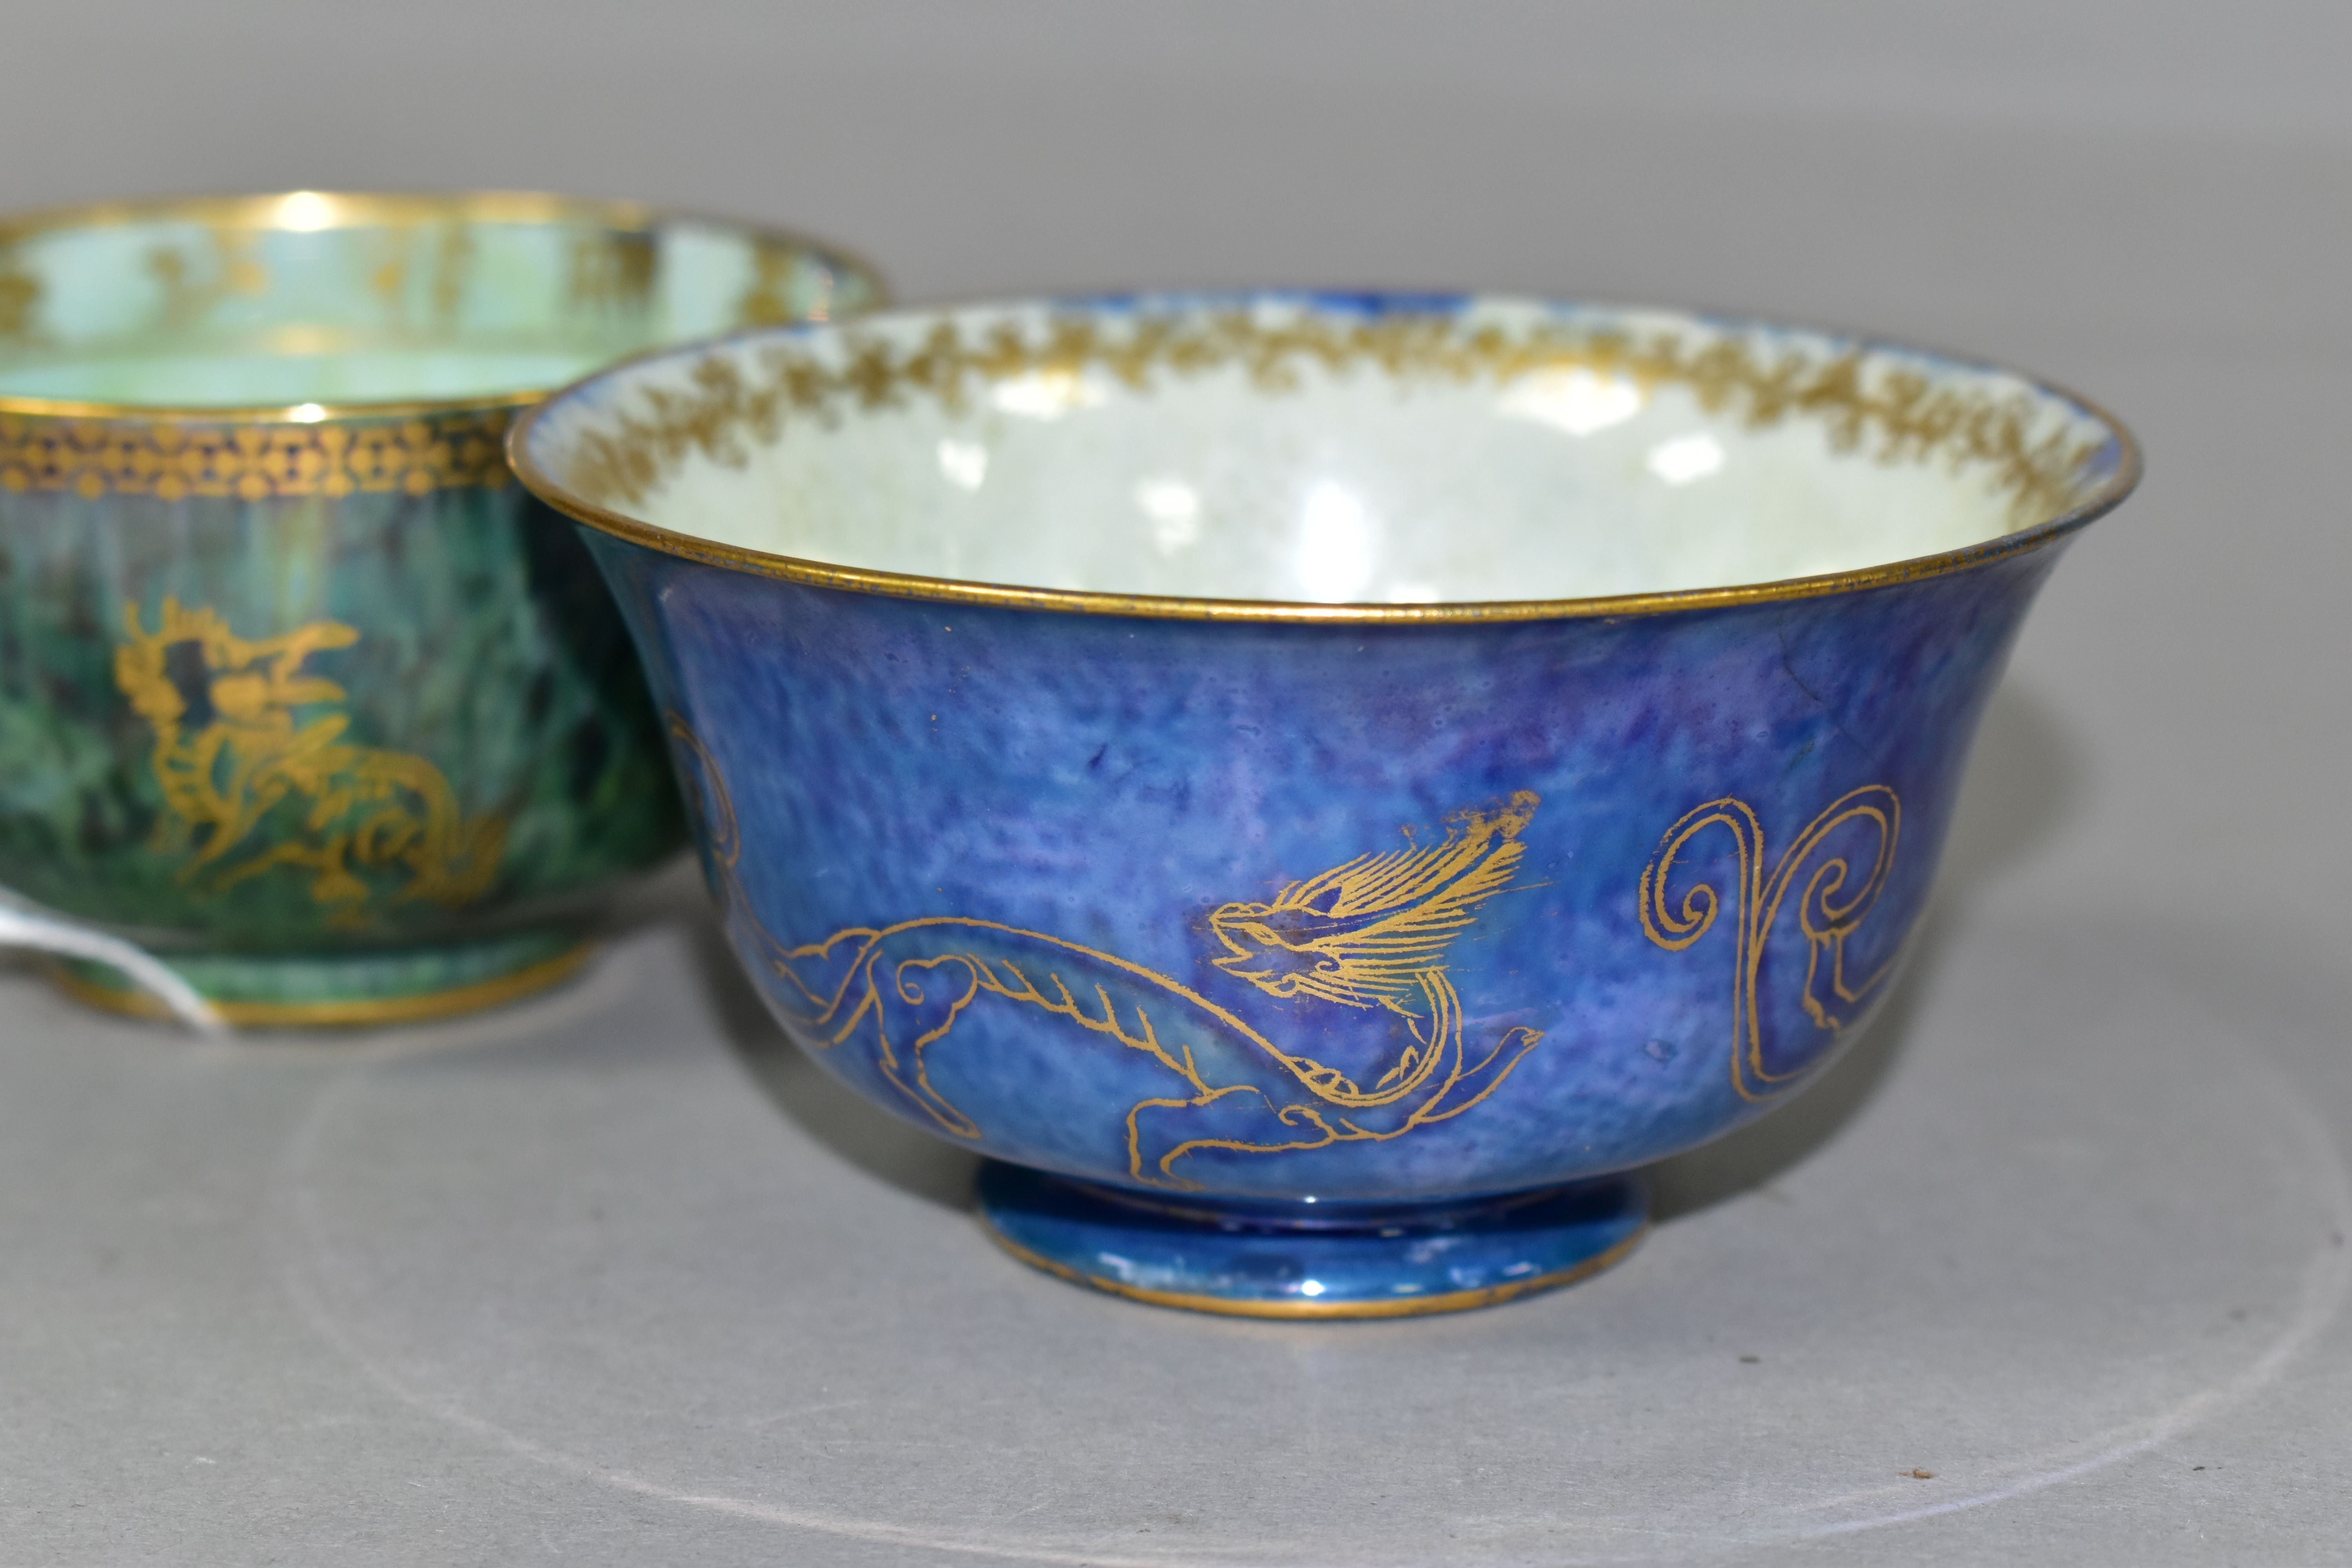 TWO WEDGWOOD BONE CHINA LUSTRE BOWLS, comprising a bowl with a blue mottled lustre exterior with a - Image 3 of 7